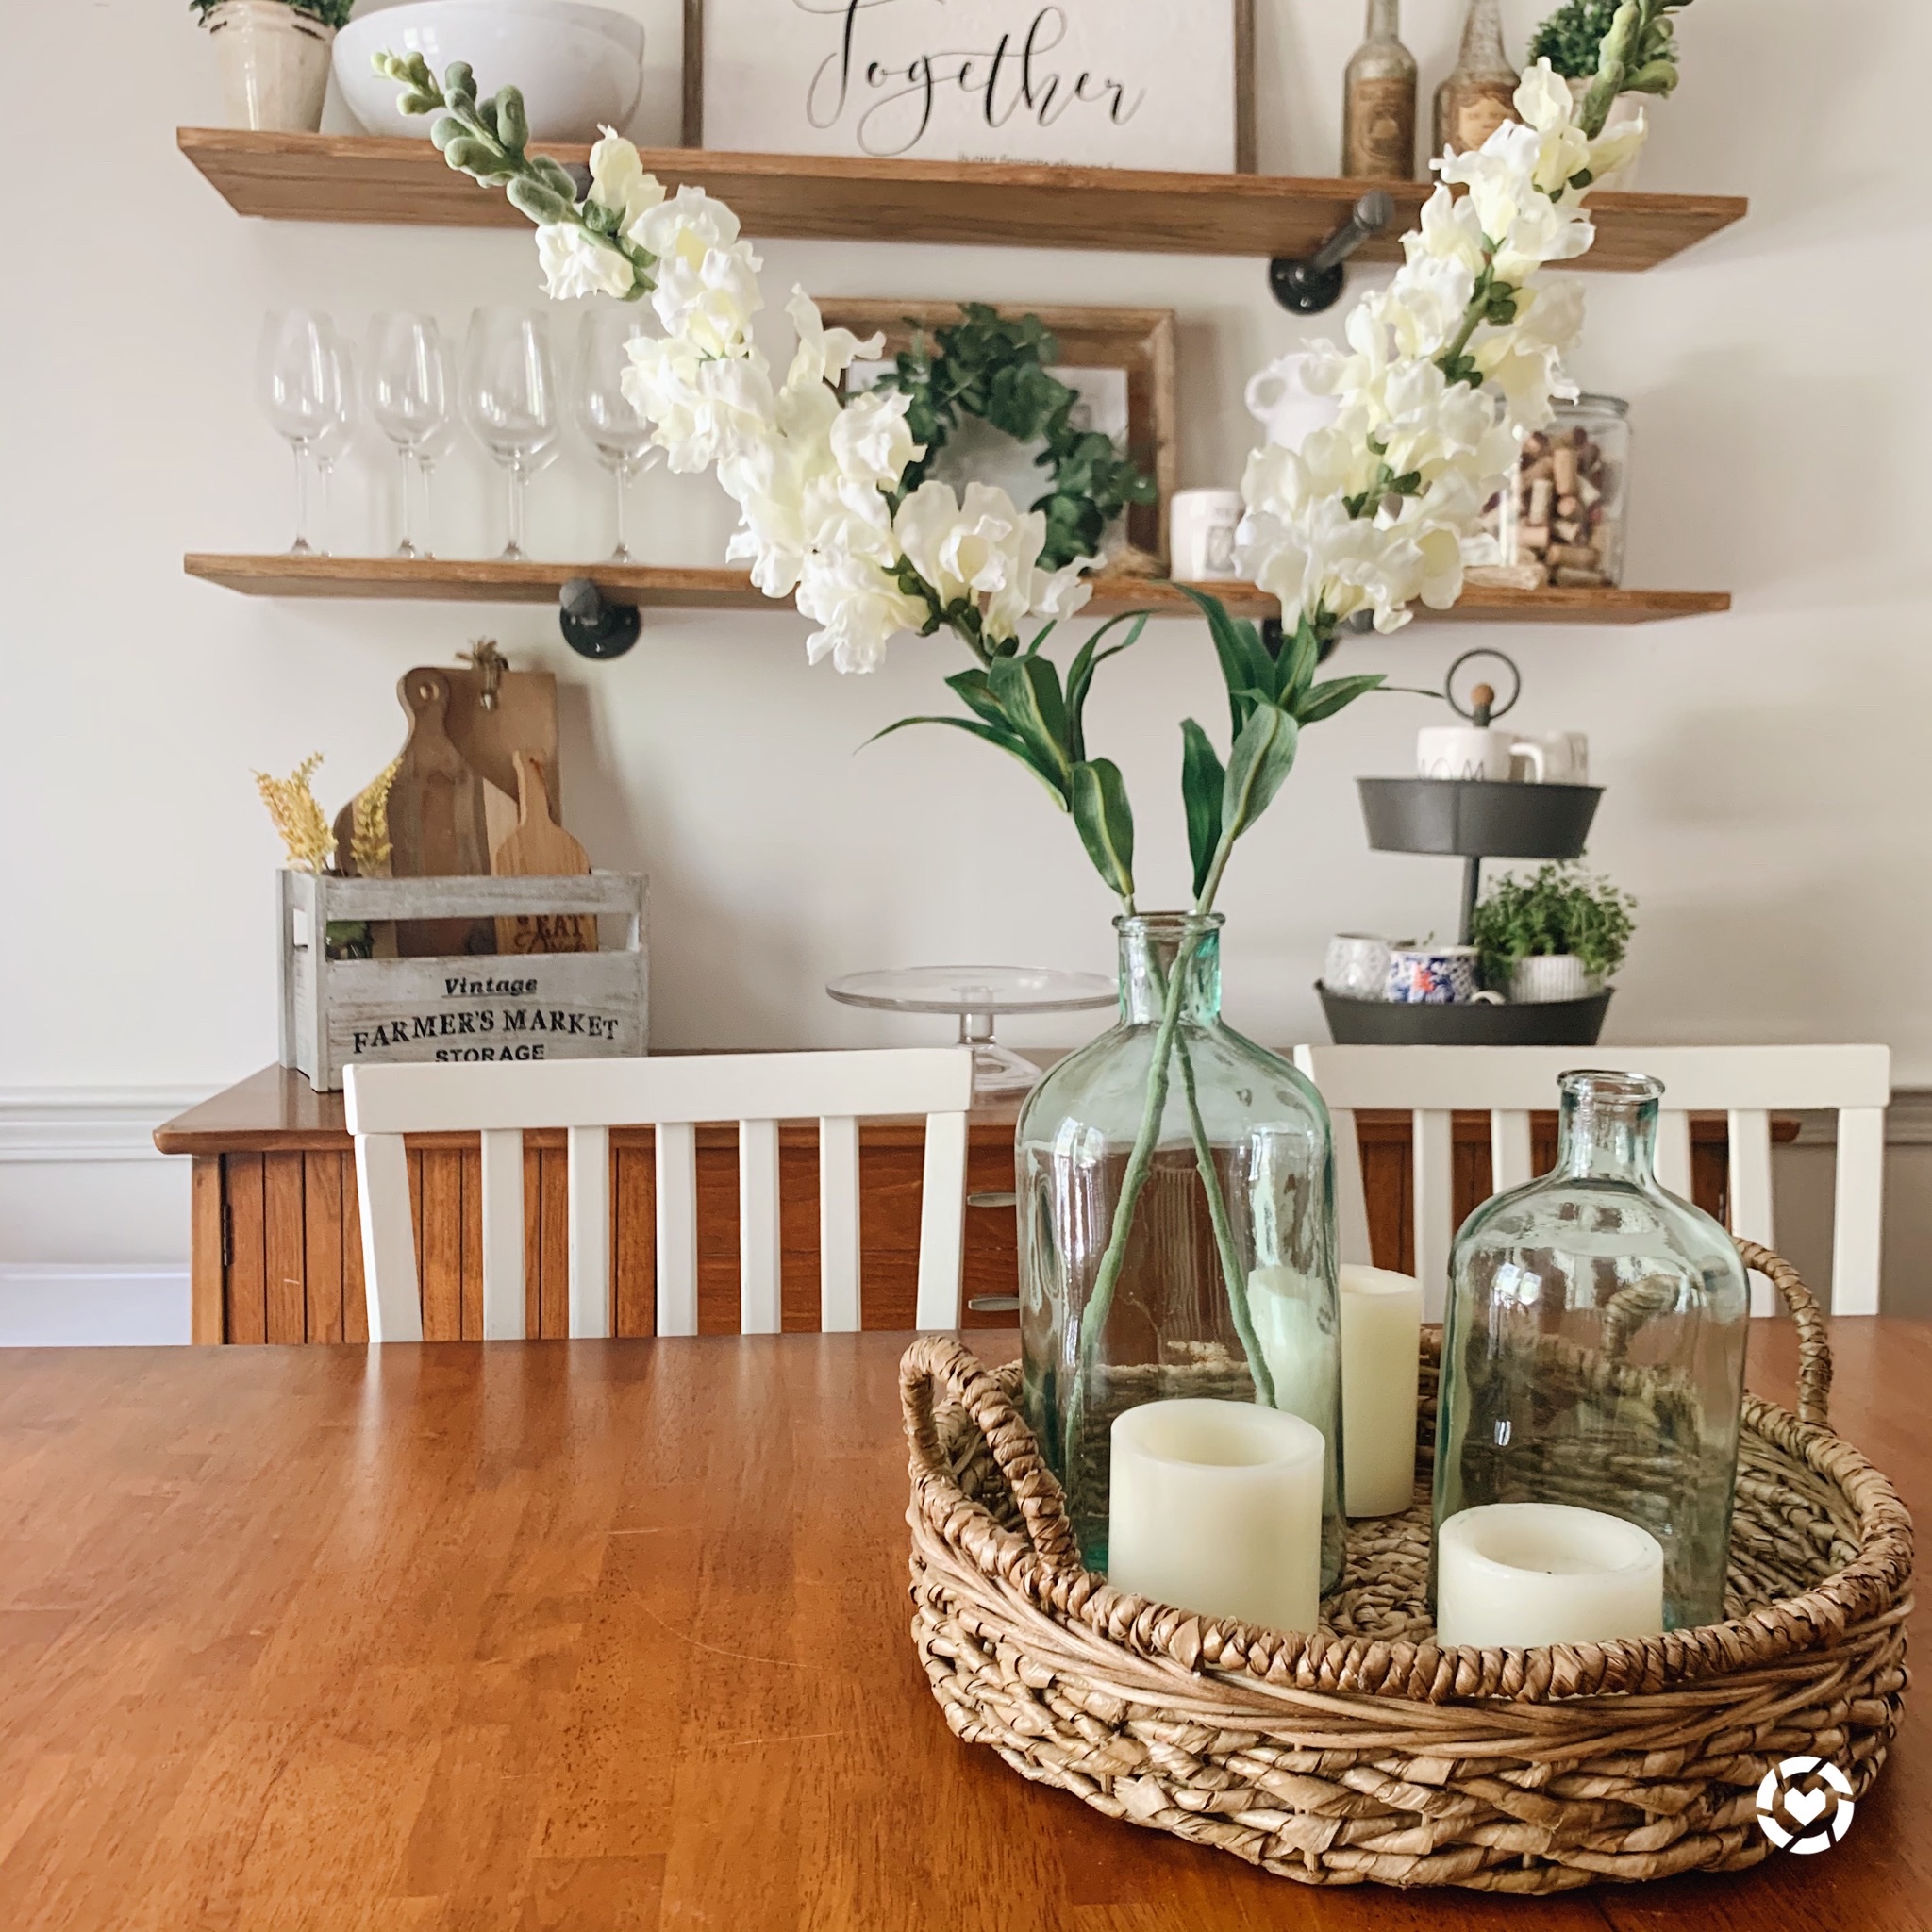 dining room decor from spring to summer blue vases | ourlittlehomestyle.com